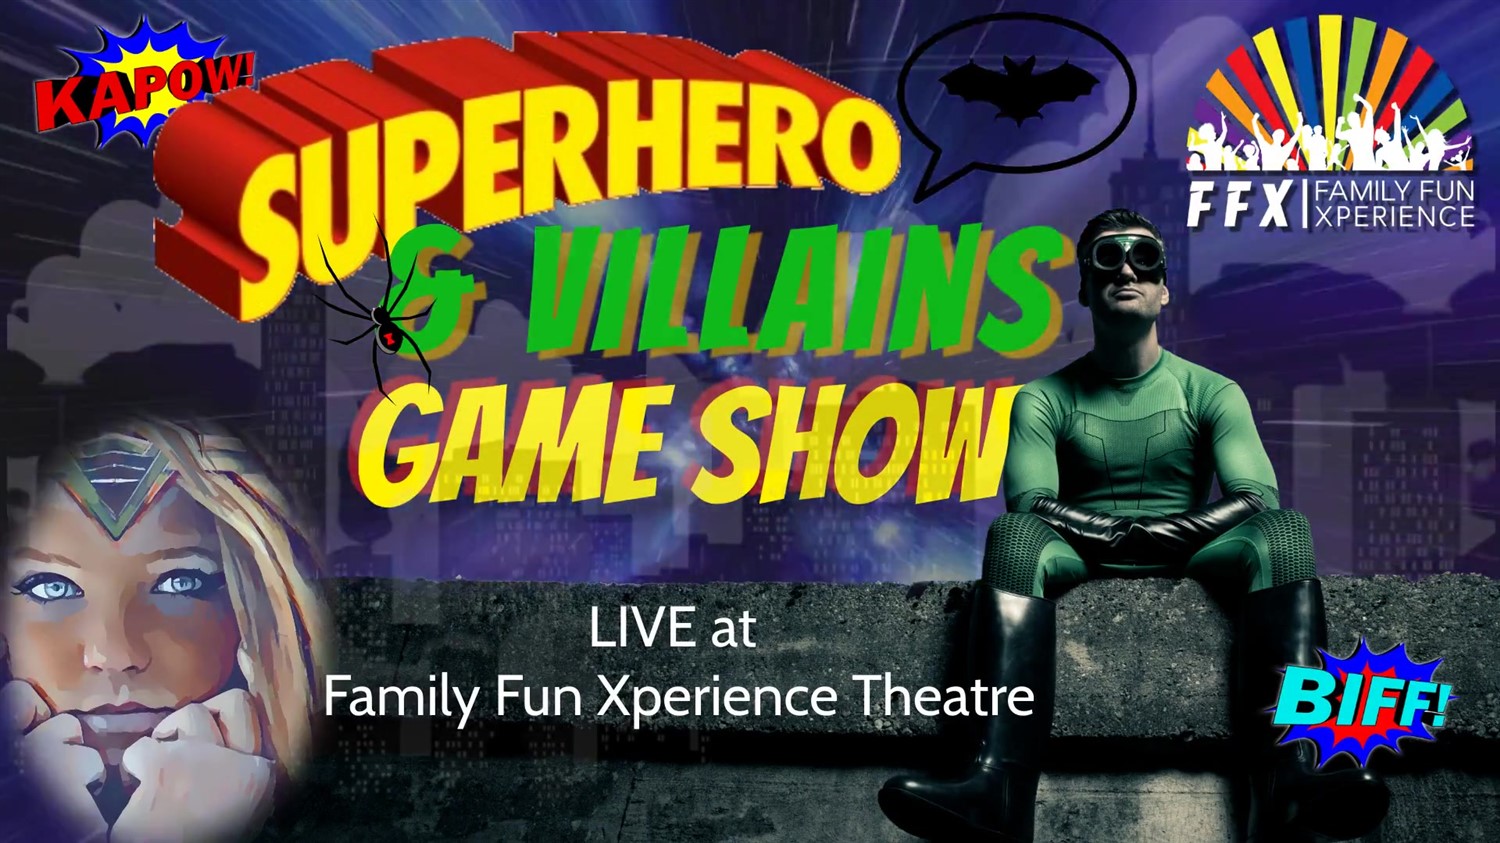 SUPERHEROES & VILLAINS Live Game Show with Special Costume Cosplay Contest! on oct. 26, 19:00@FFX Theatre - Pick a seat, Buy tickets and Get information on Family Fun Xperience tickets.ffxshow.org